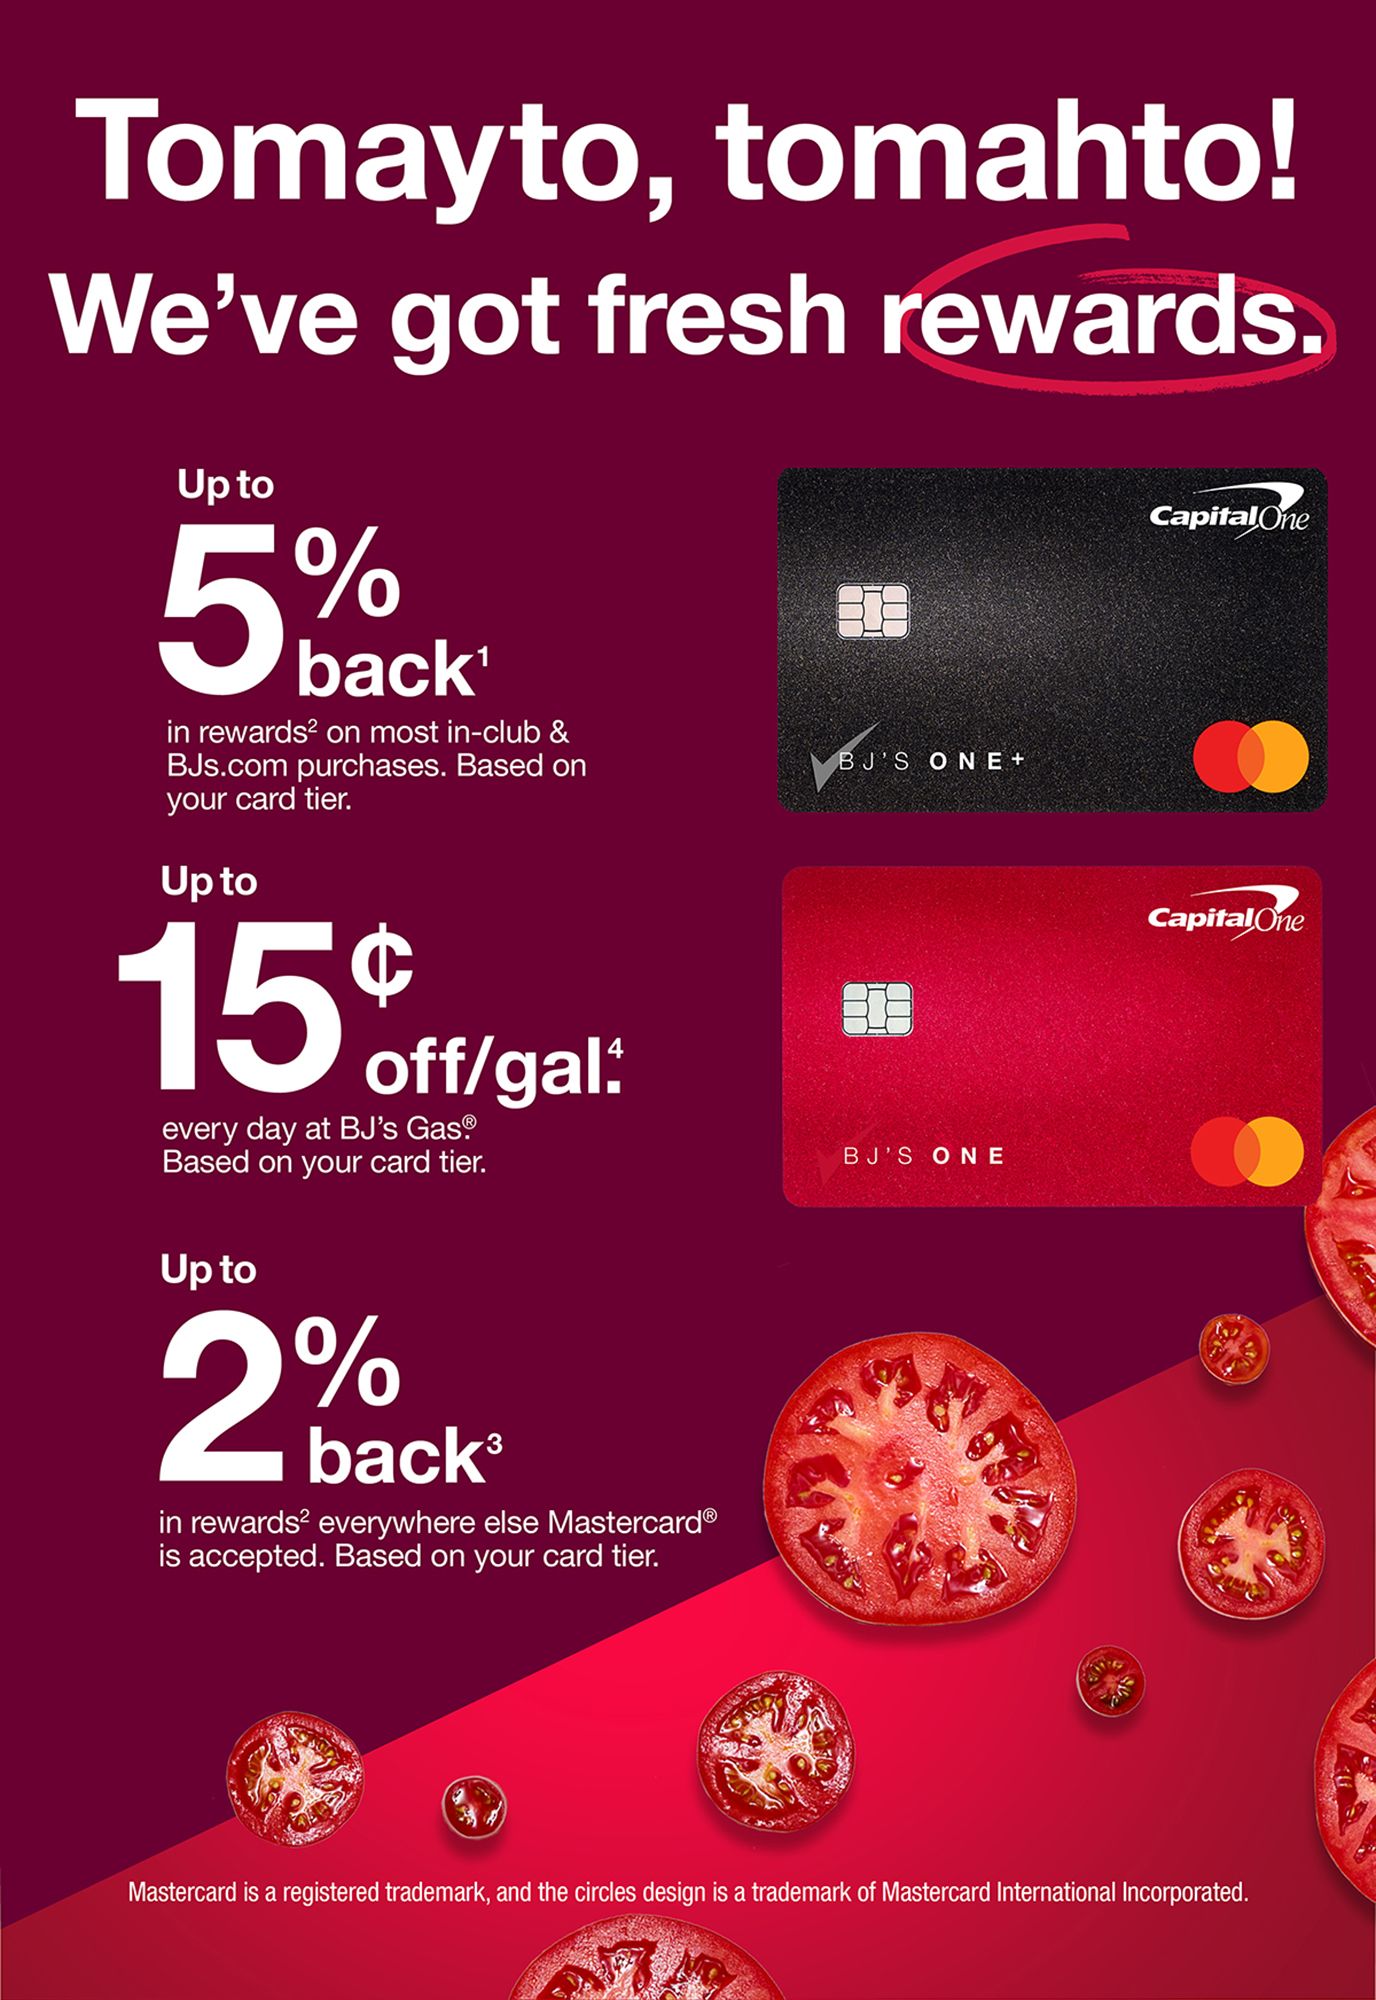 Tomayto, Tomahto - we've got fresh rewards. Up to 5% back on BJs purchases, and up to 15 cents off galon every day on BJs Gas. See details below